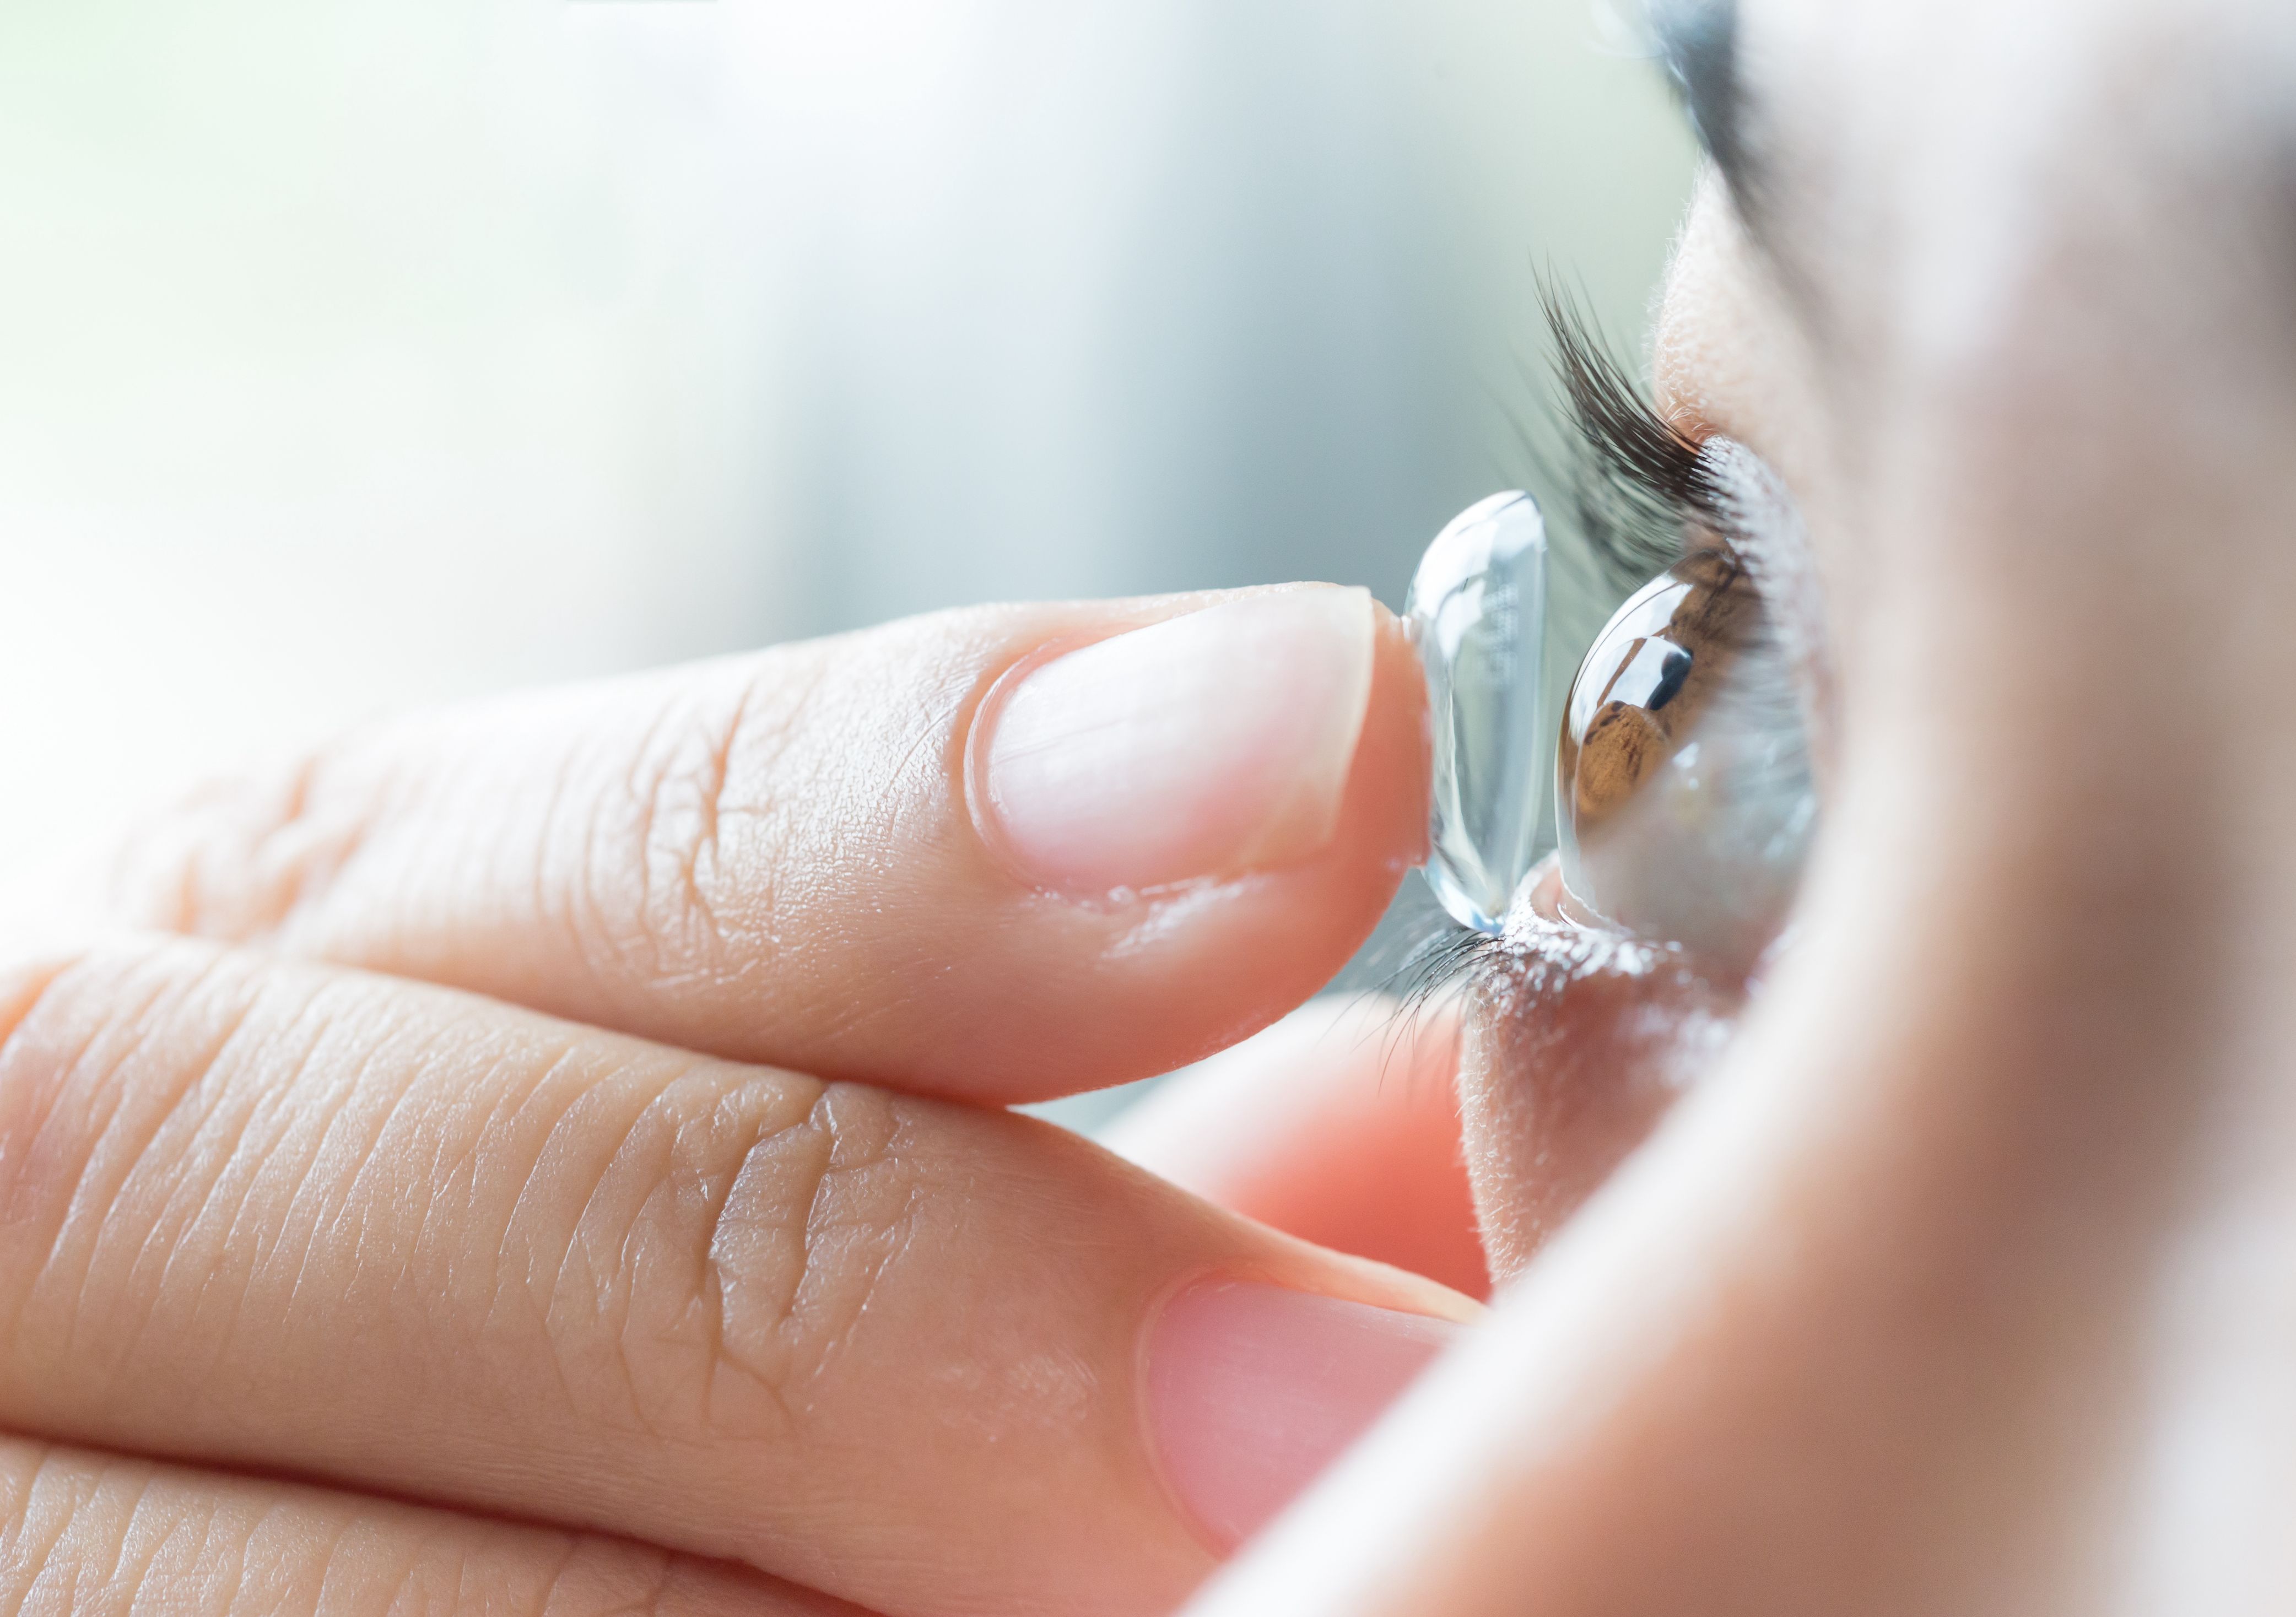 What Are Different Specialty Contact Lenses Used For?